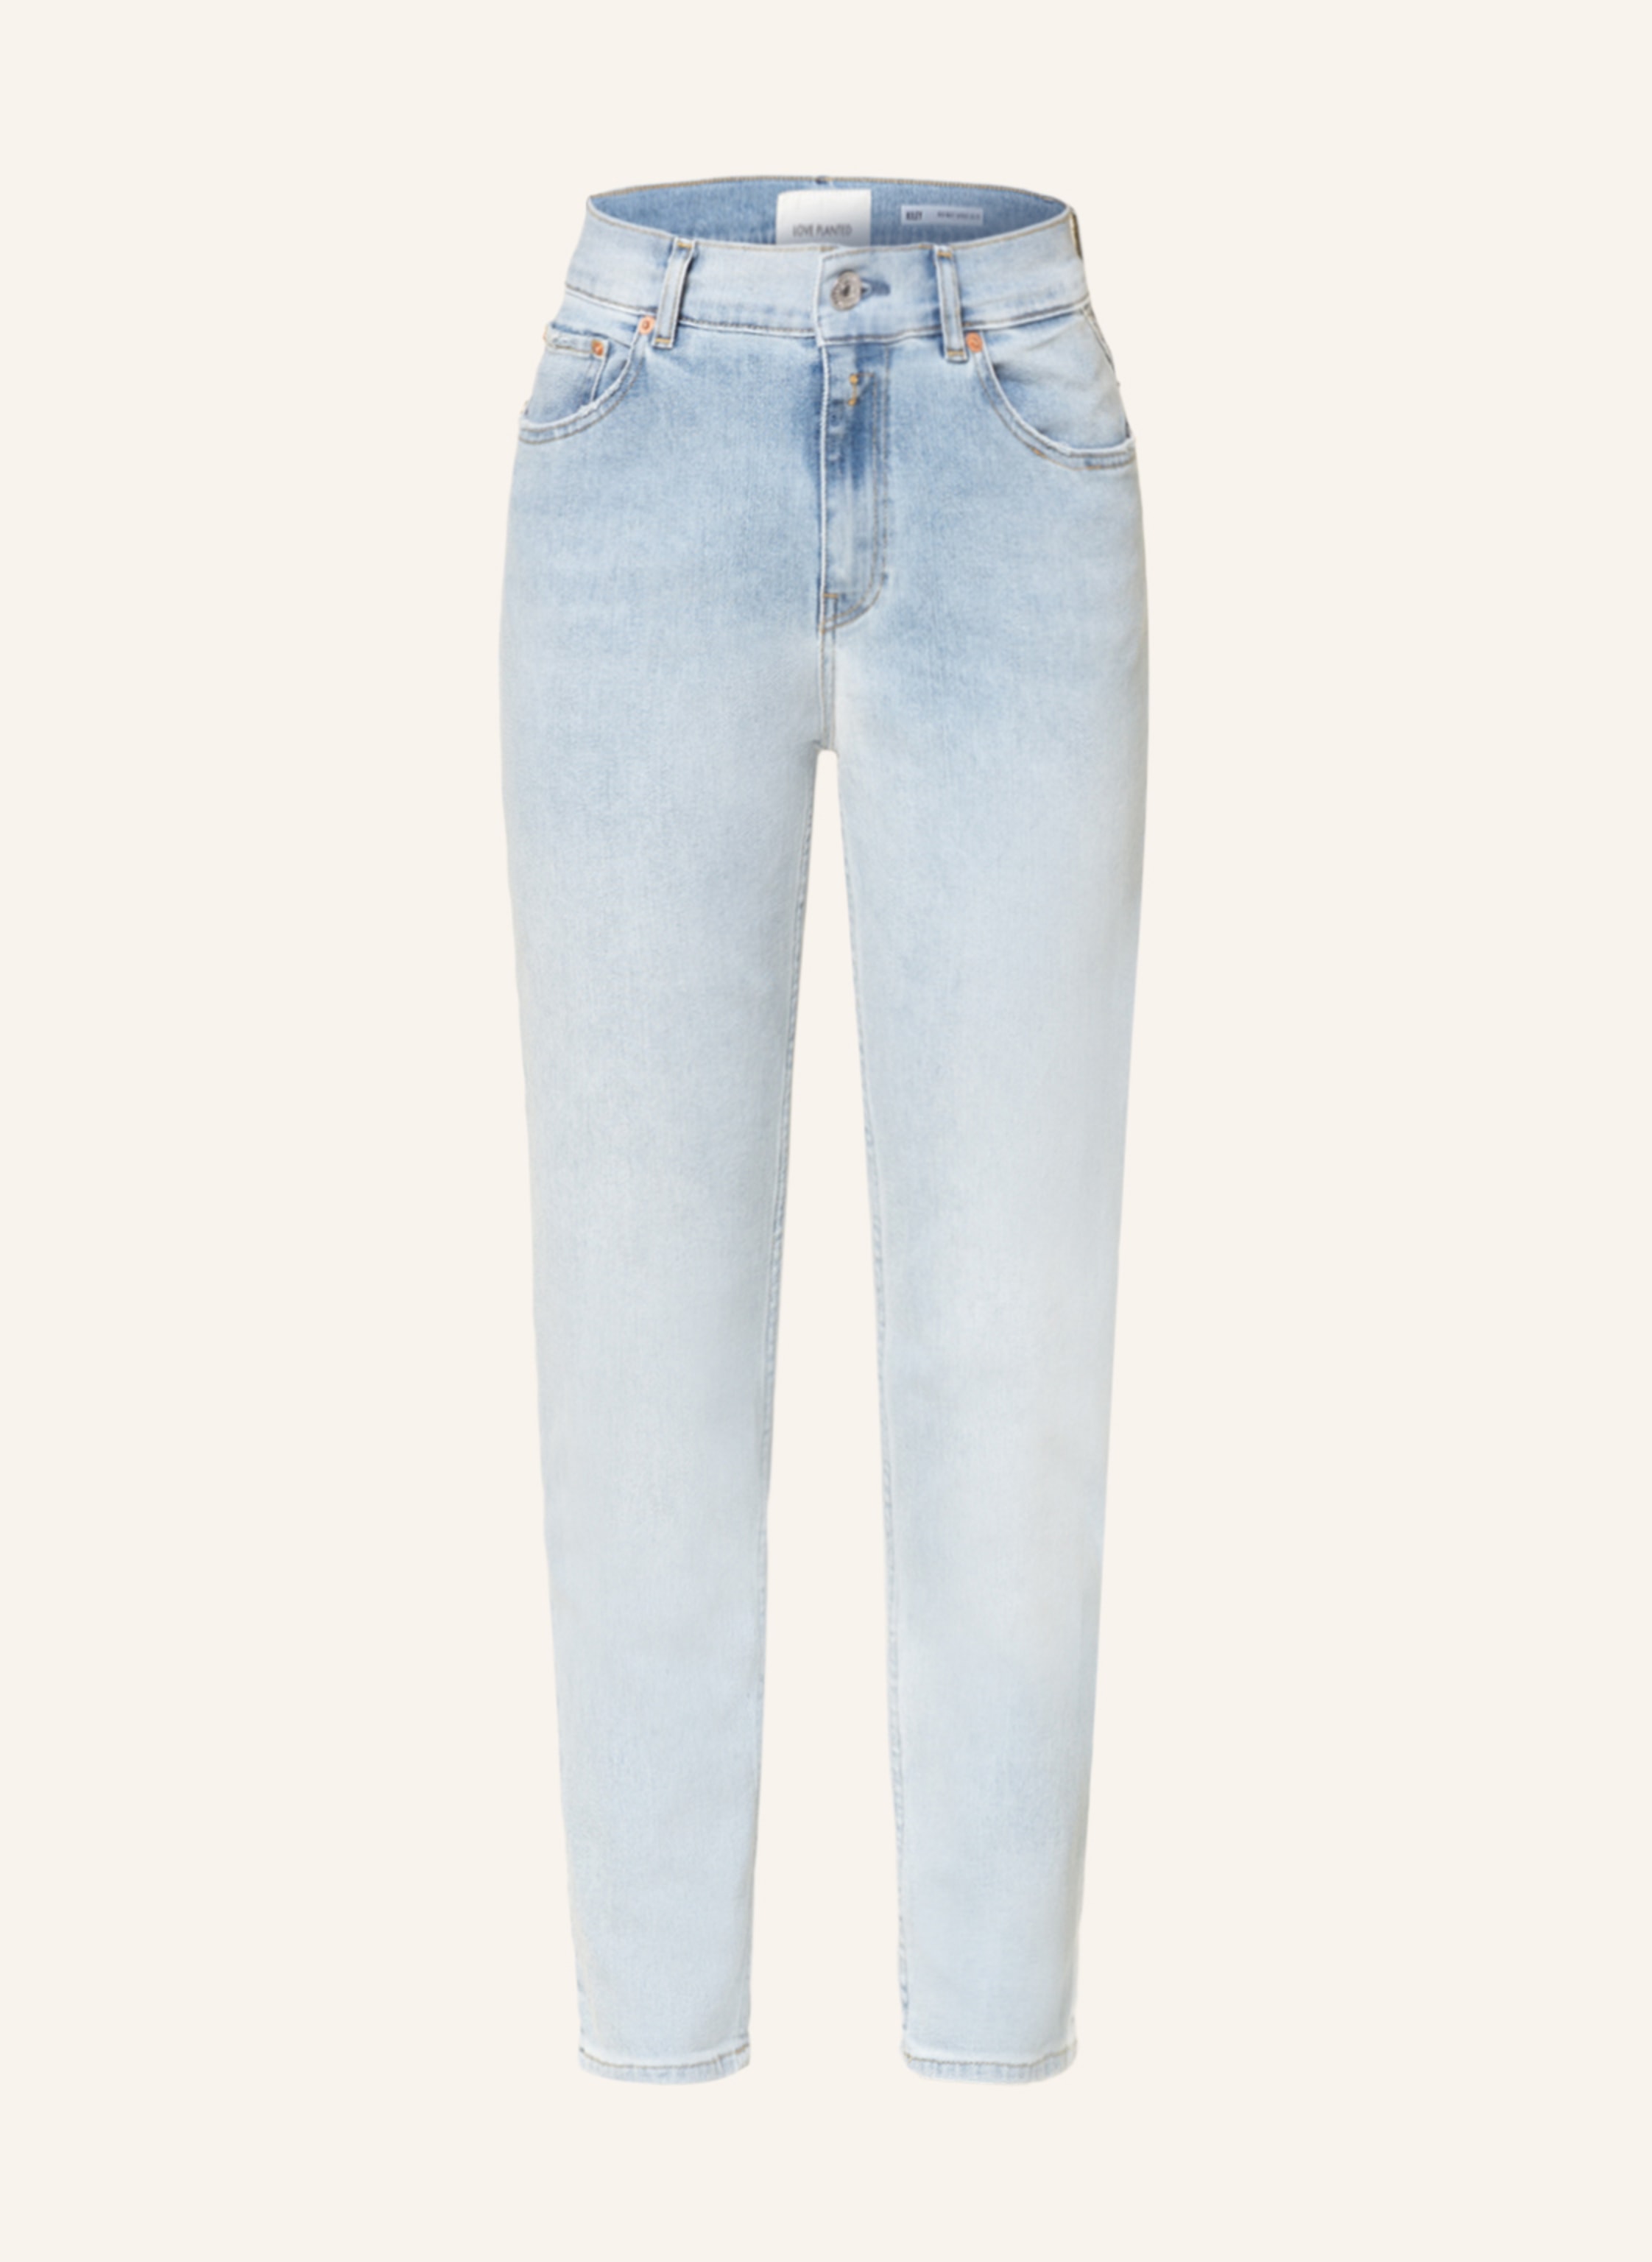 REPLAY Jeans KILEY in 011 super light blue